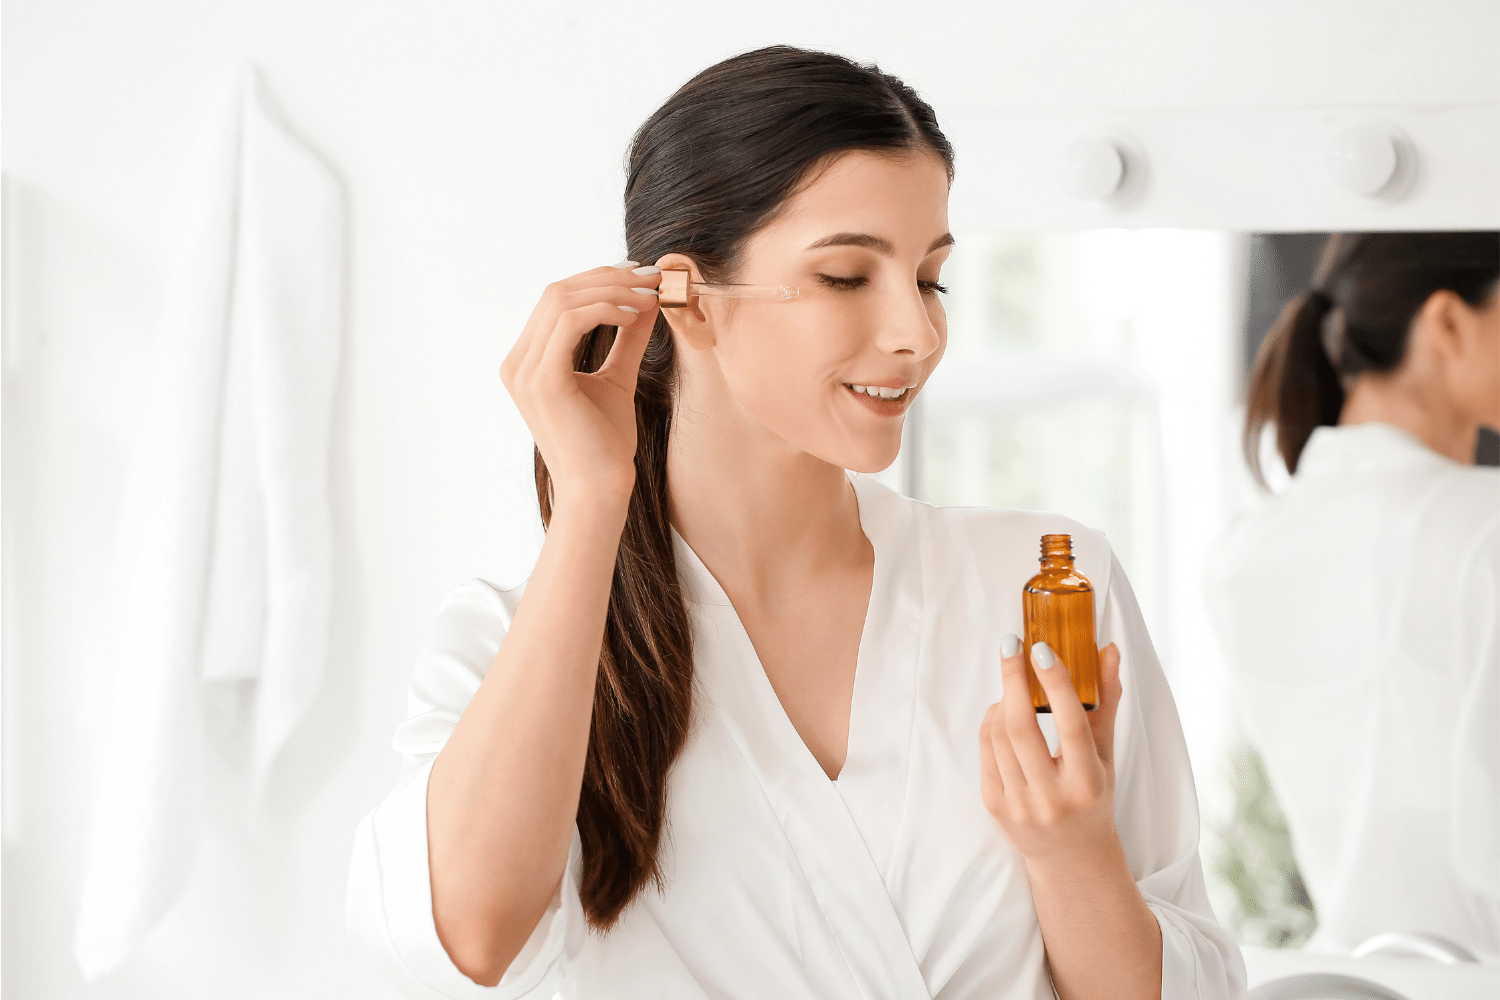 How Effective is Mulberry Serum? Facts & Unbiased Reviews of 7 Serums!